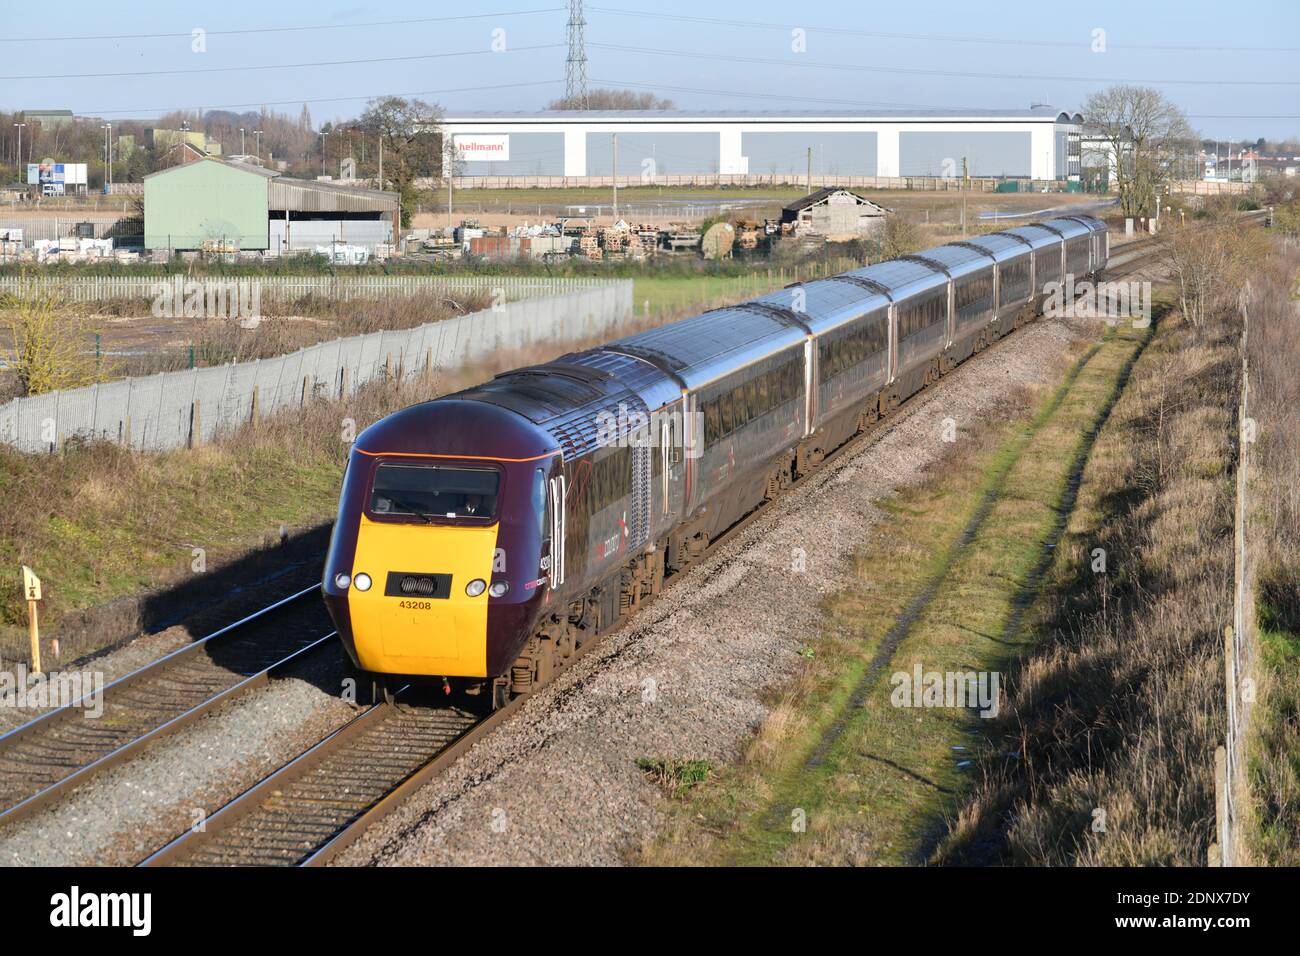 Ex-works Power Car 43208 leads a CrossCountry HST on the 08:08 Edinburgh to Bristol Temple Meads passing Barton Under Needwood on 17 December 2020 Stock Photo